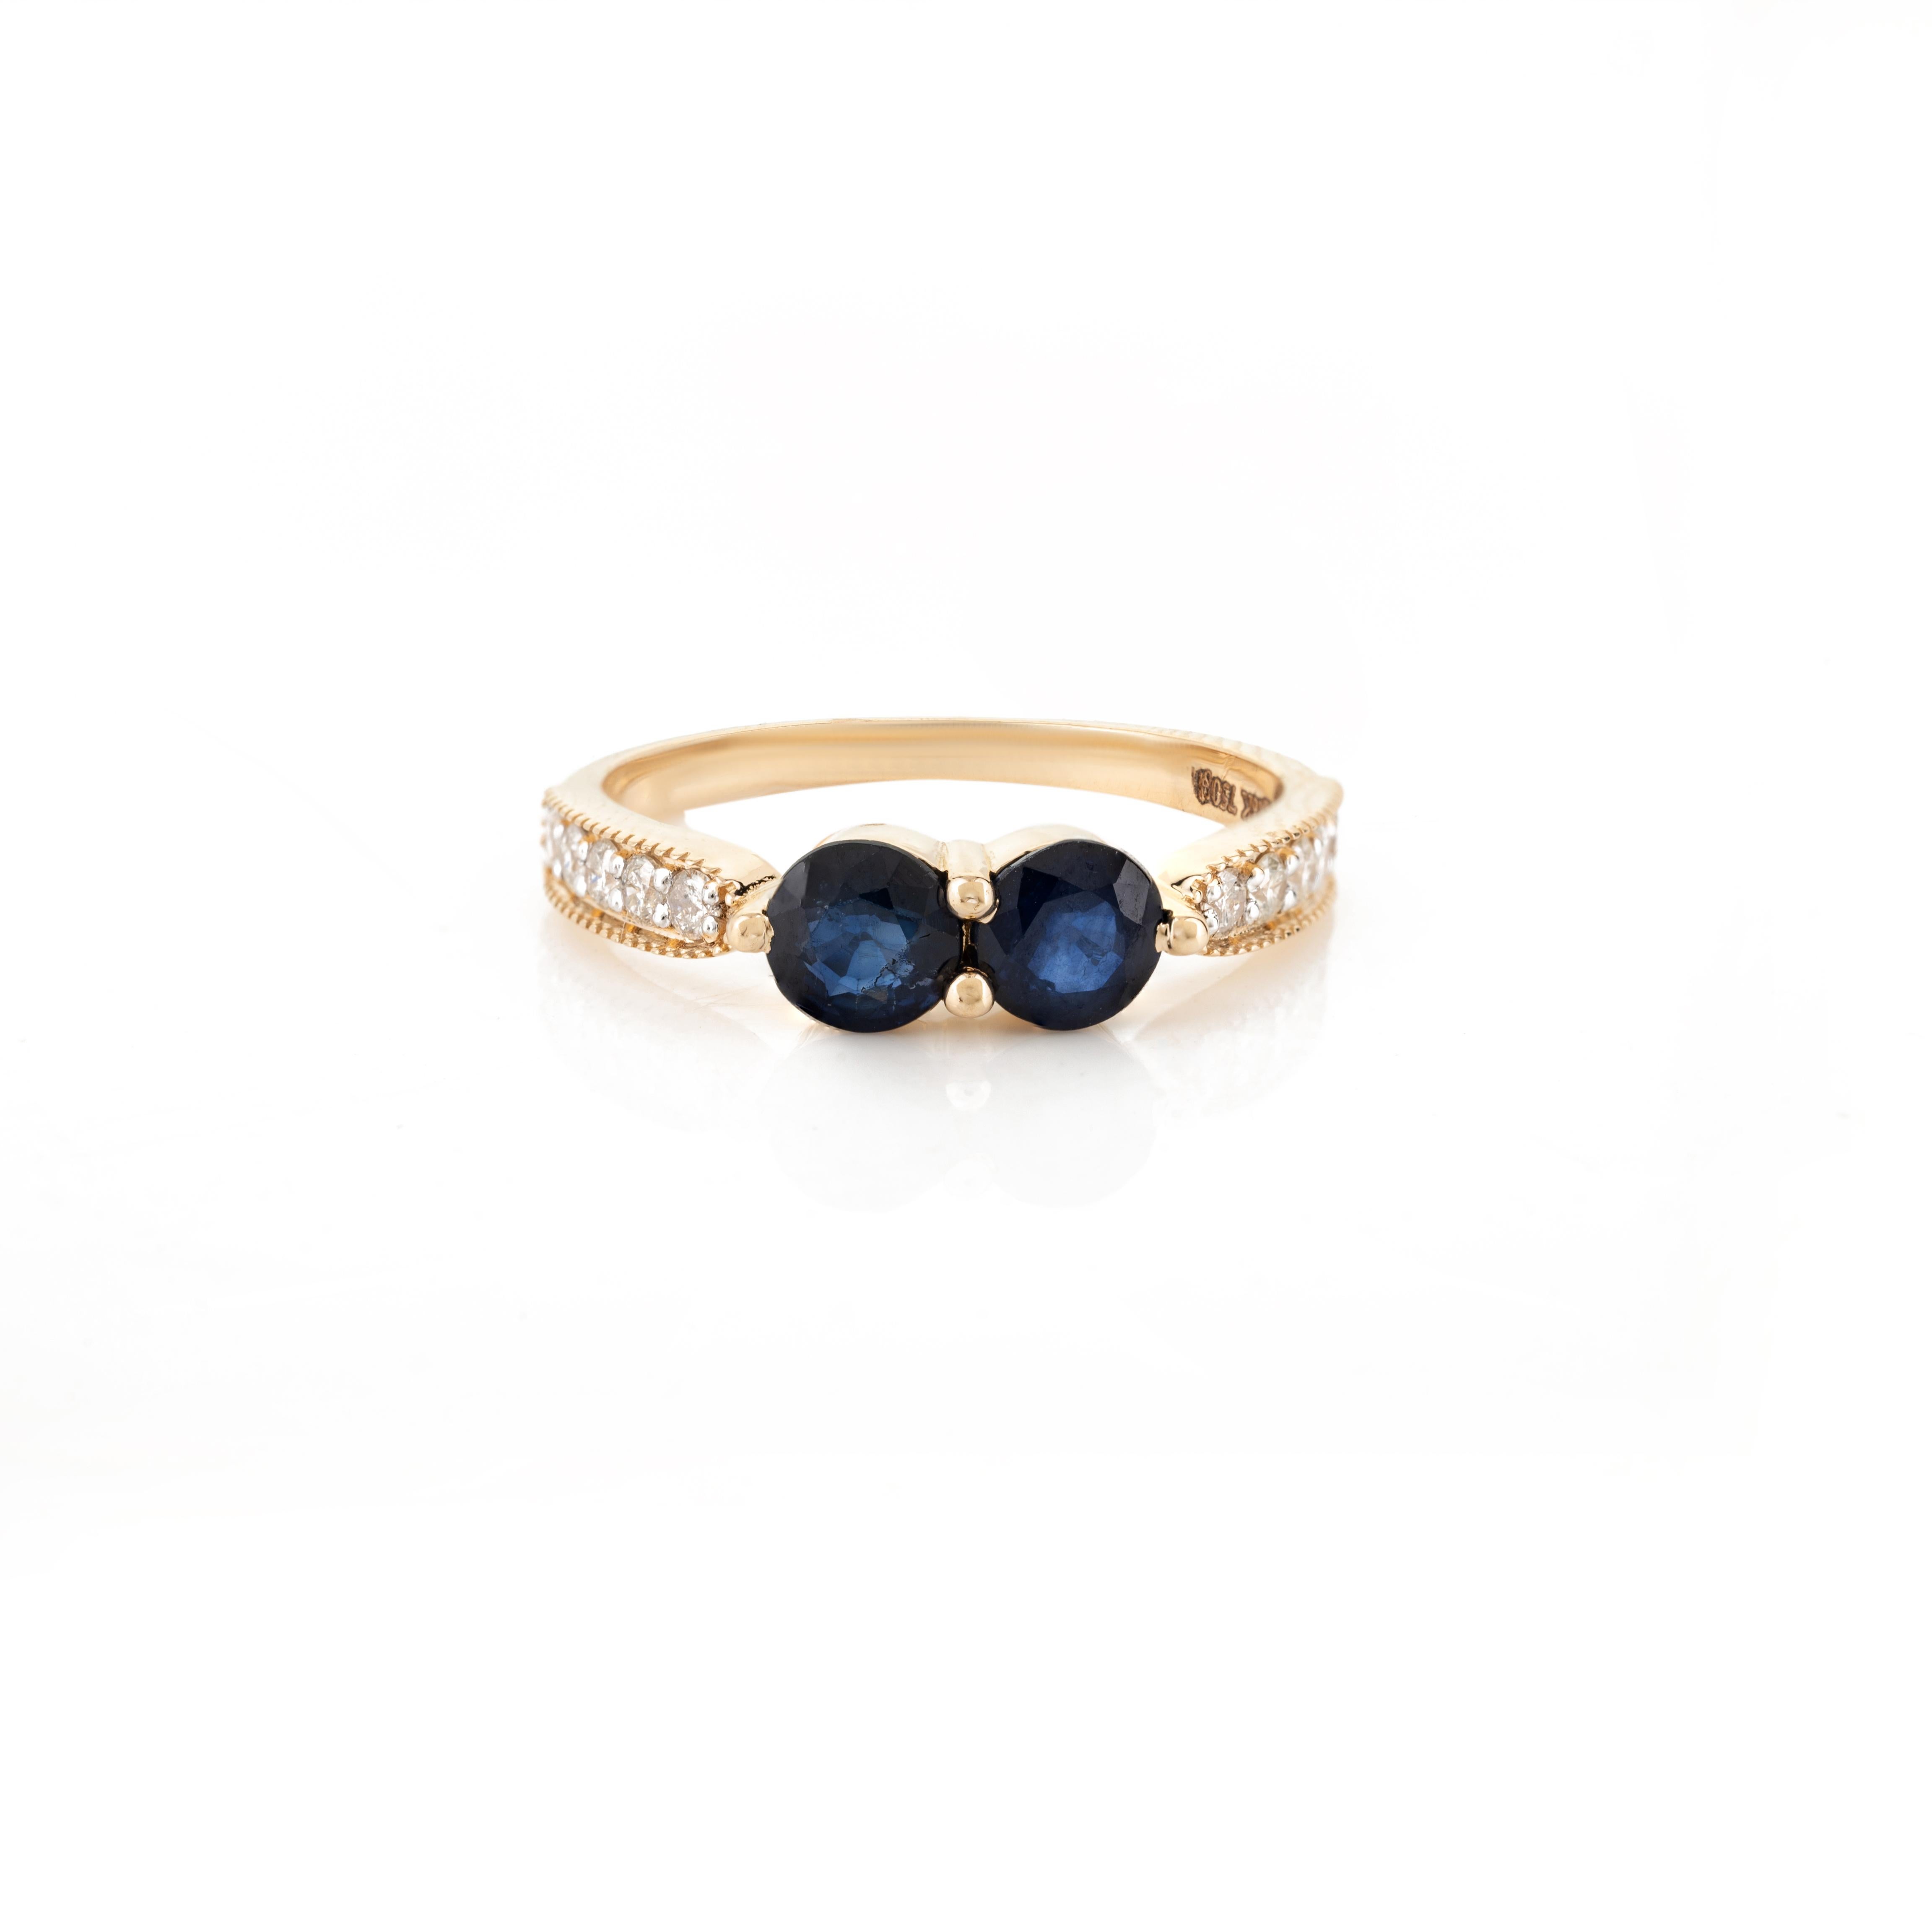 For Sale:  18k Solid Yellow Gold Two Stone Blue Sapphire Diamond Ring Wedding Gift for Her 3